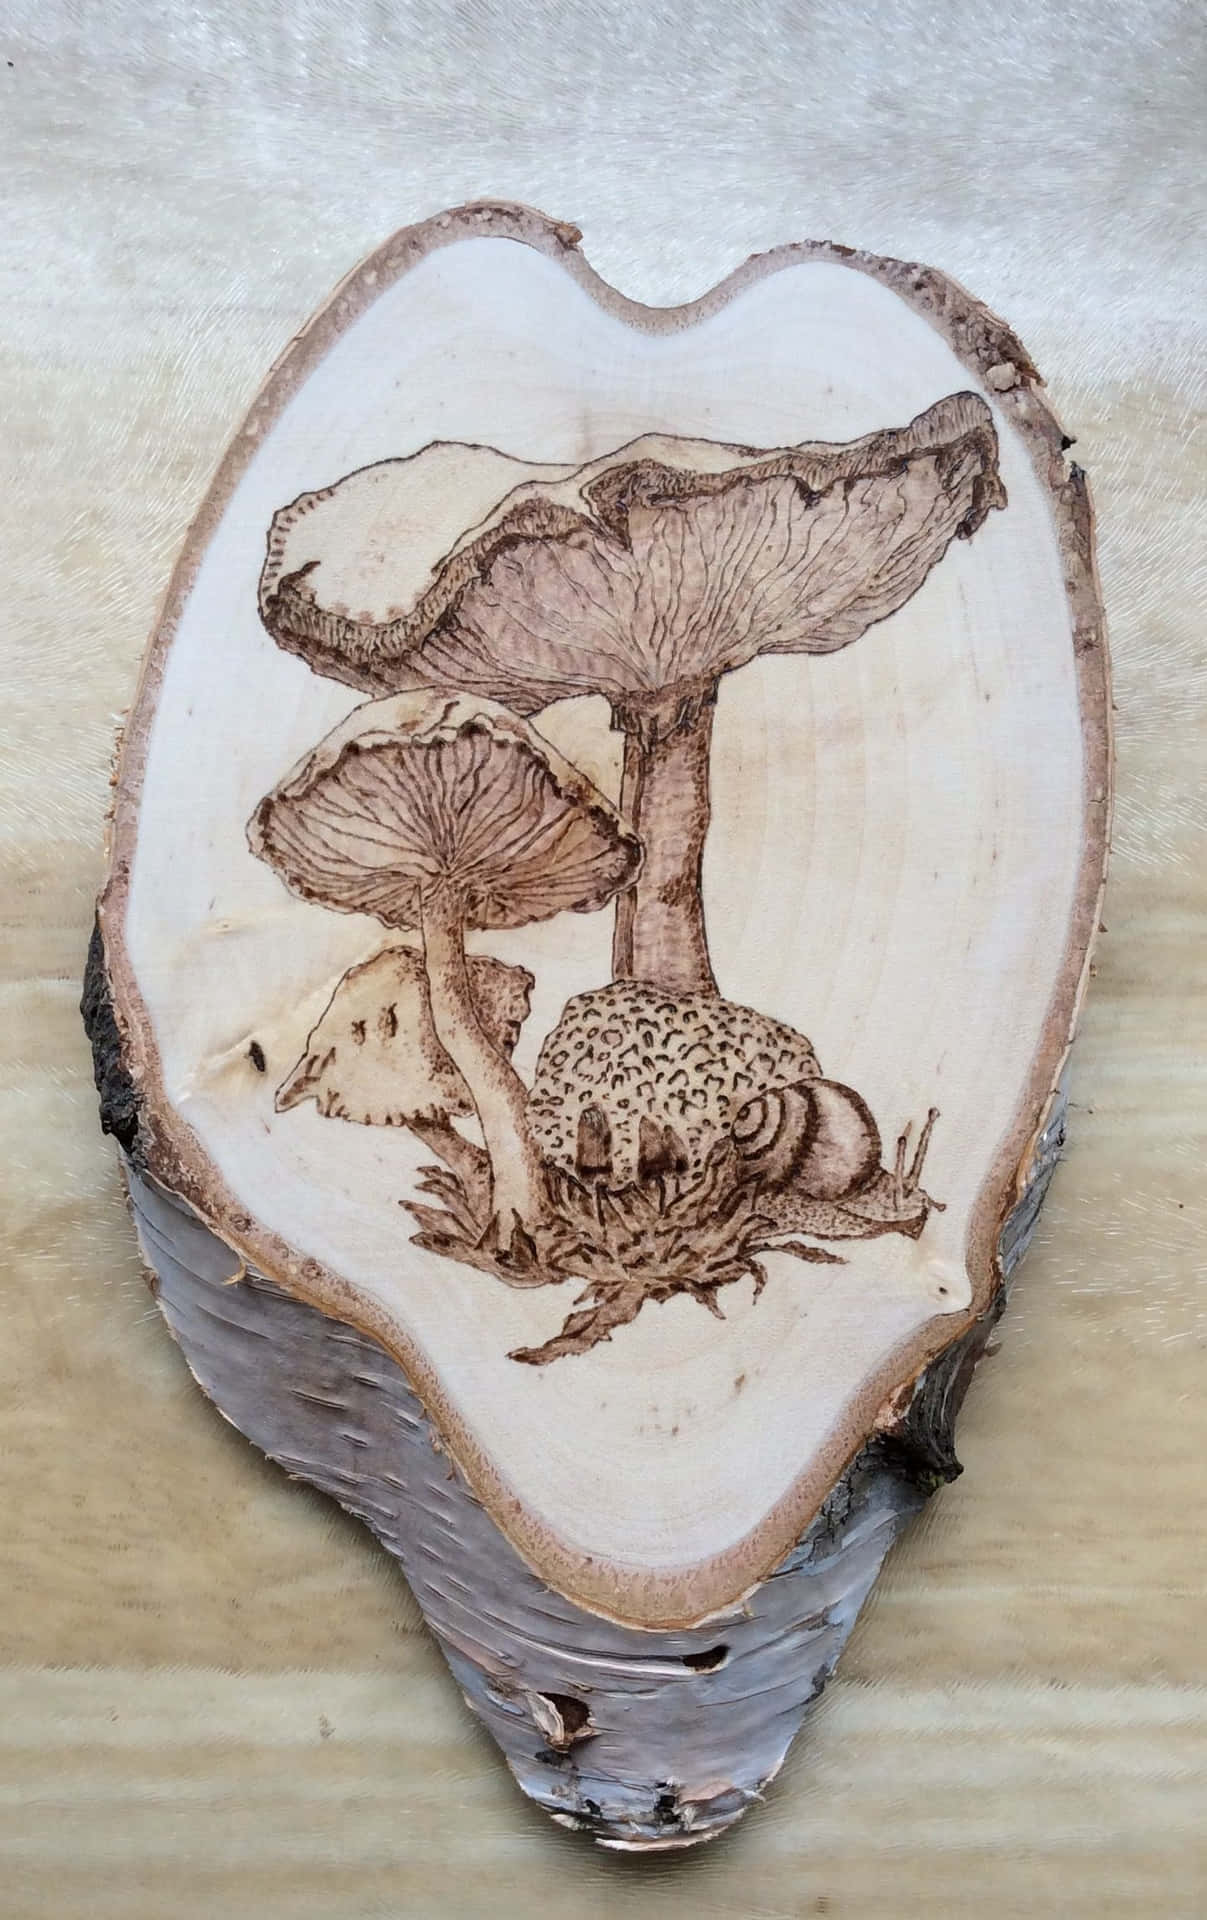 A Piece Of Wood With A Mushroom Carving On It